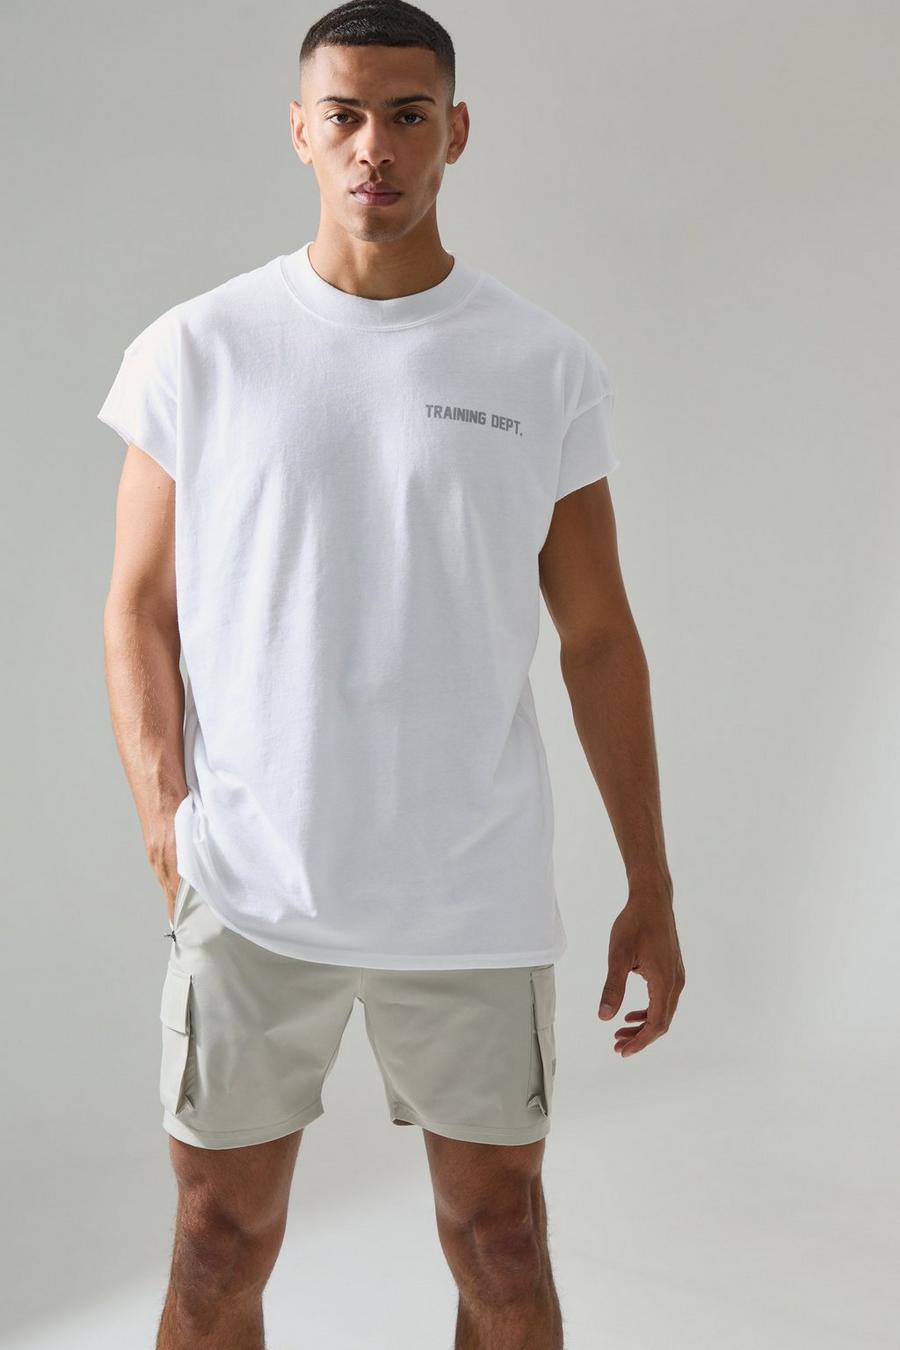 Active Training Dept Oversized Extended Neck Cut Off T-shirt, White